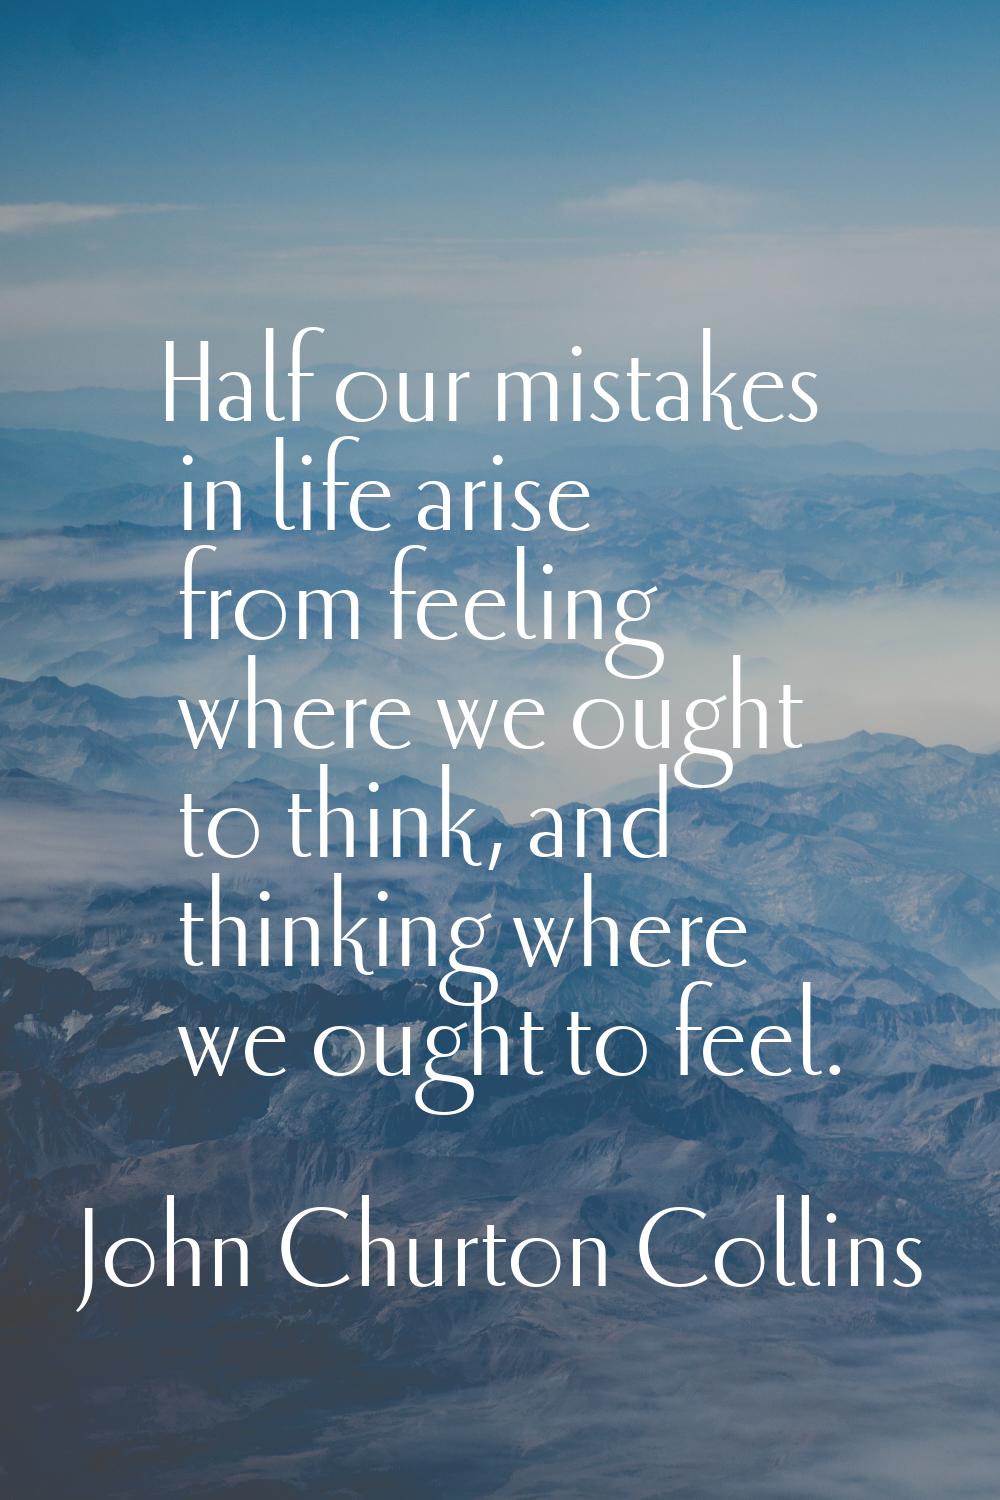 Half our mistakes in life arise from feeling where we ought to think, and thinking where we ought t